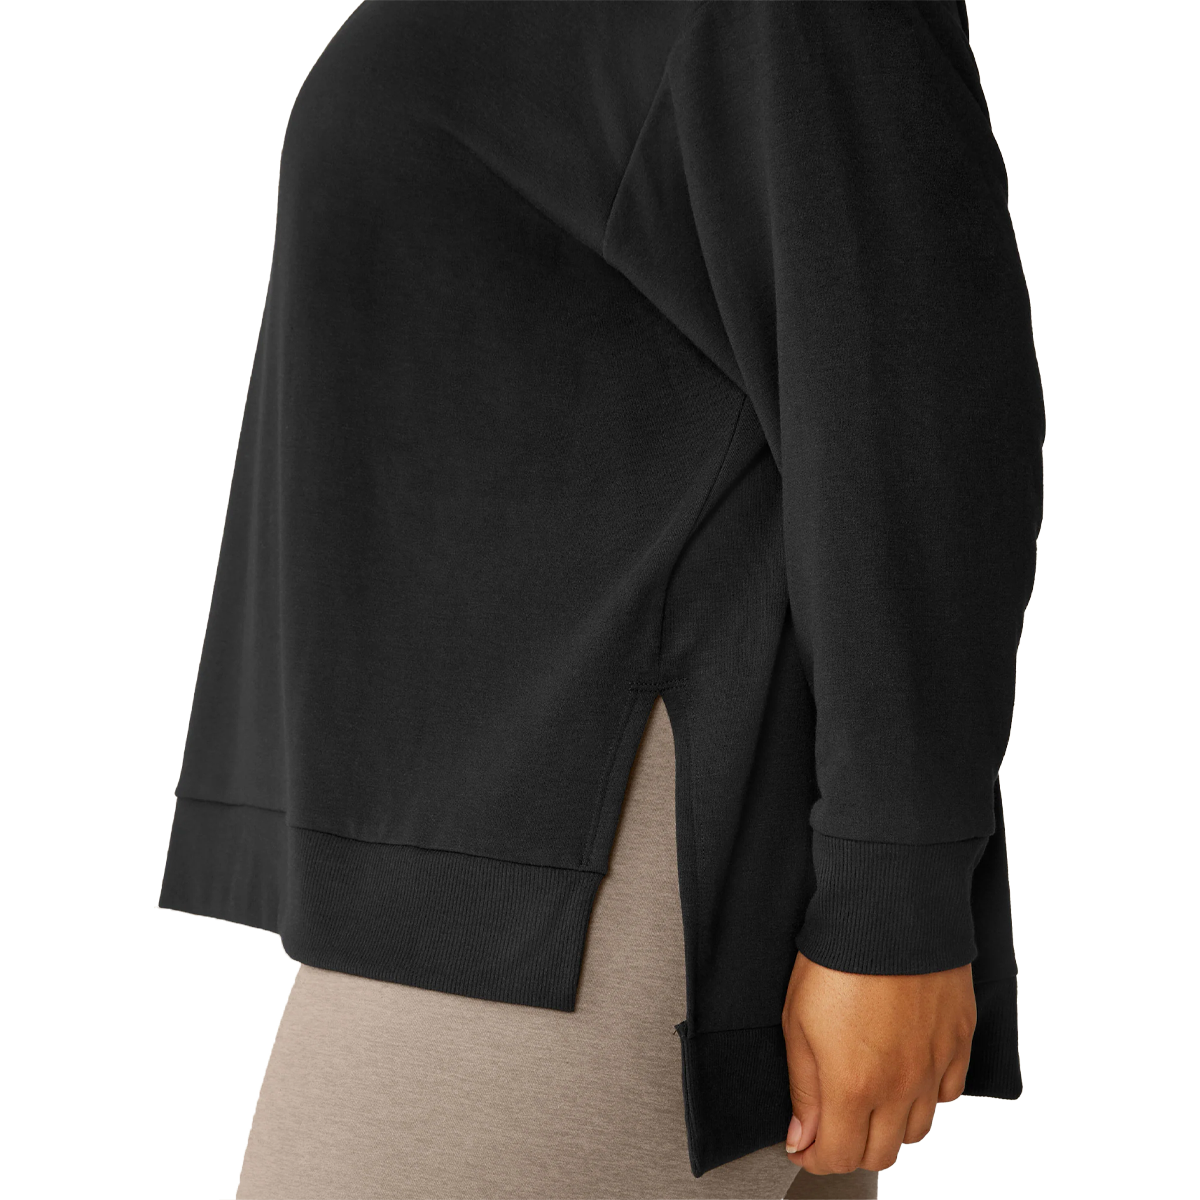 Women's Off Duty Pullover - Extended alternate view